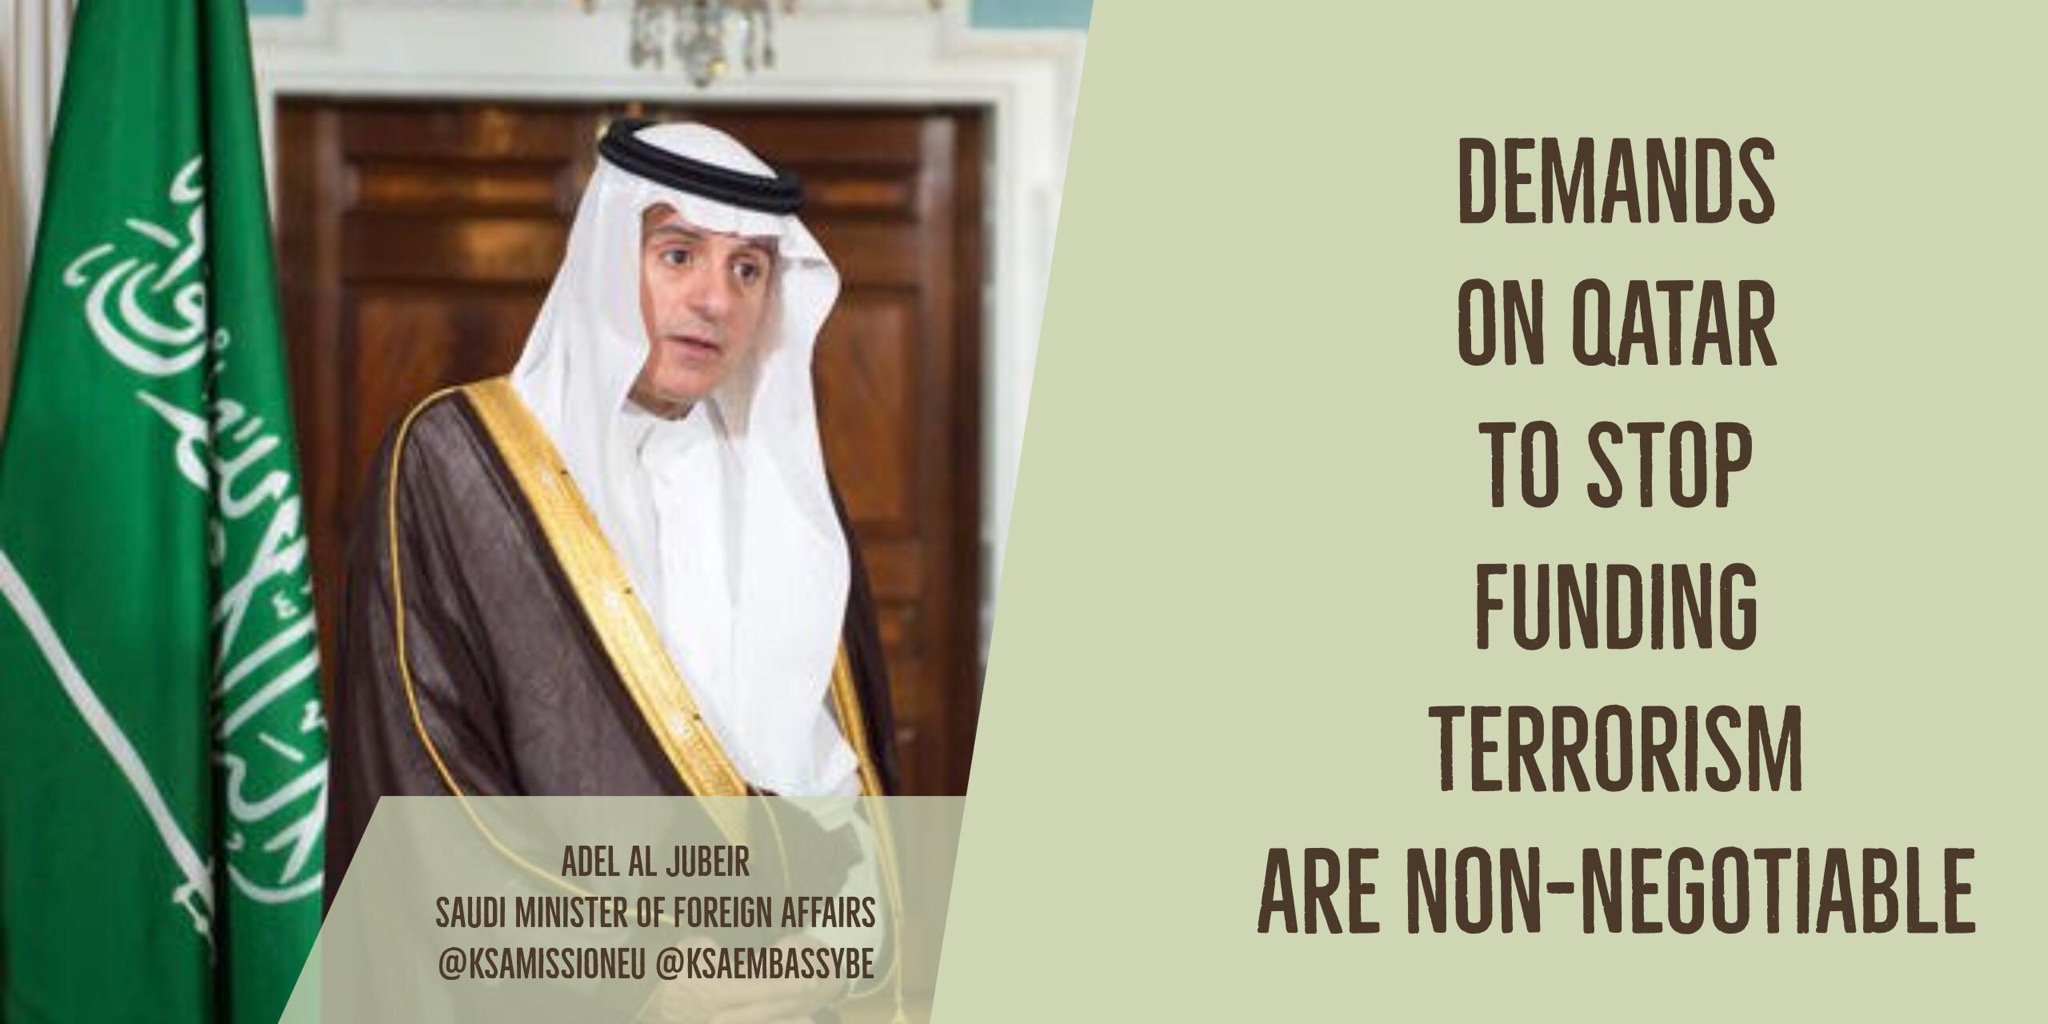 Saudi Foreign Minister: Demands on Qatar to Stop Funding Terrorism are Non-Negotiable